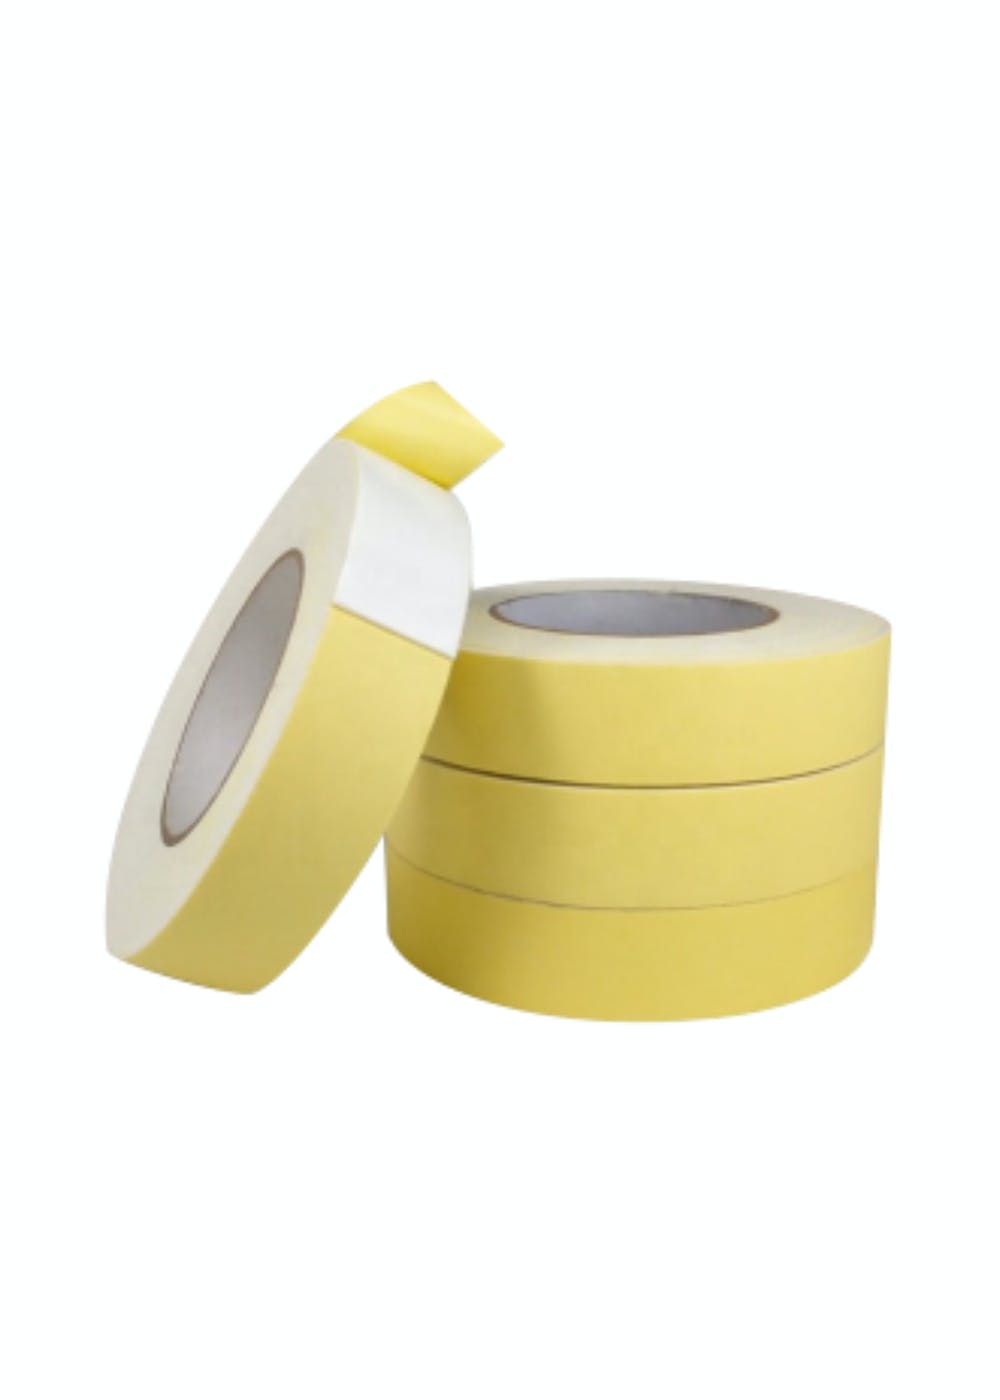 DIGISMART® Form Tape, Labelling, Painting, no leave adhesive, Paper From tape pack